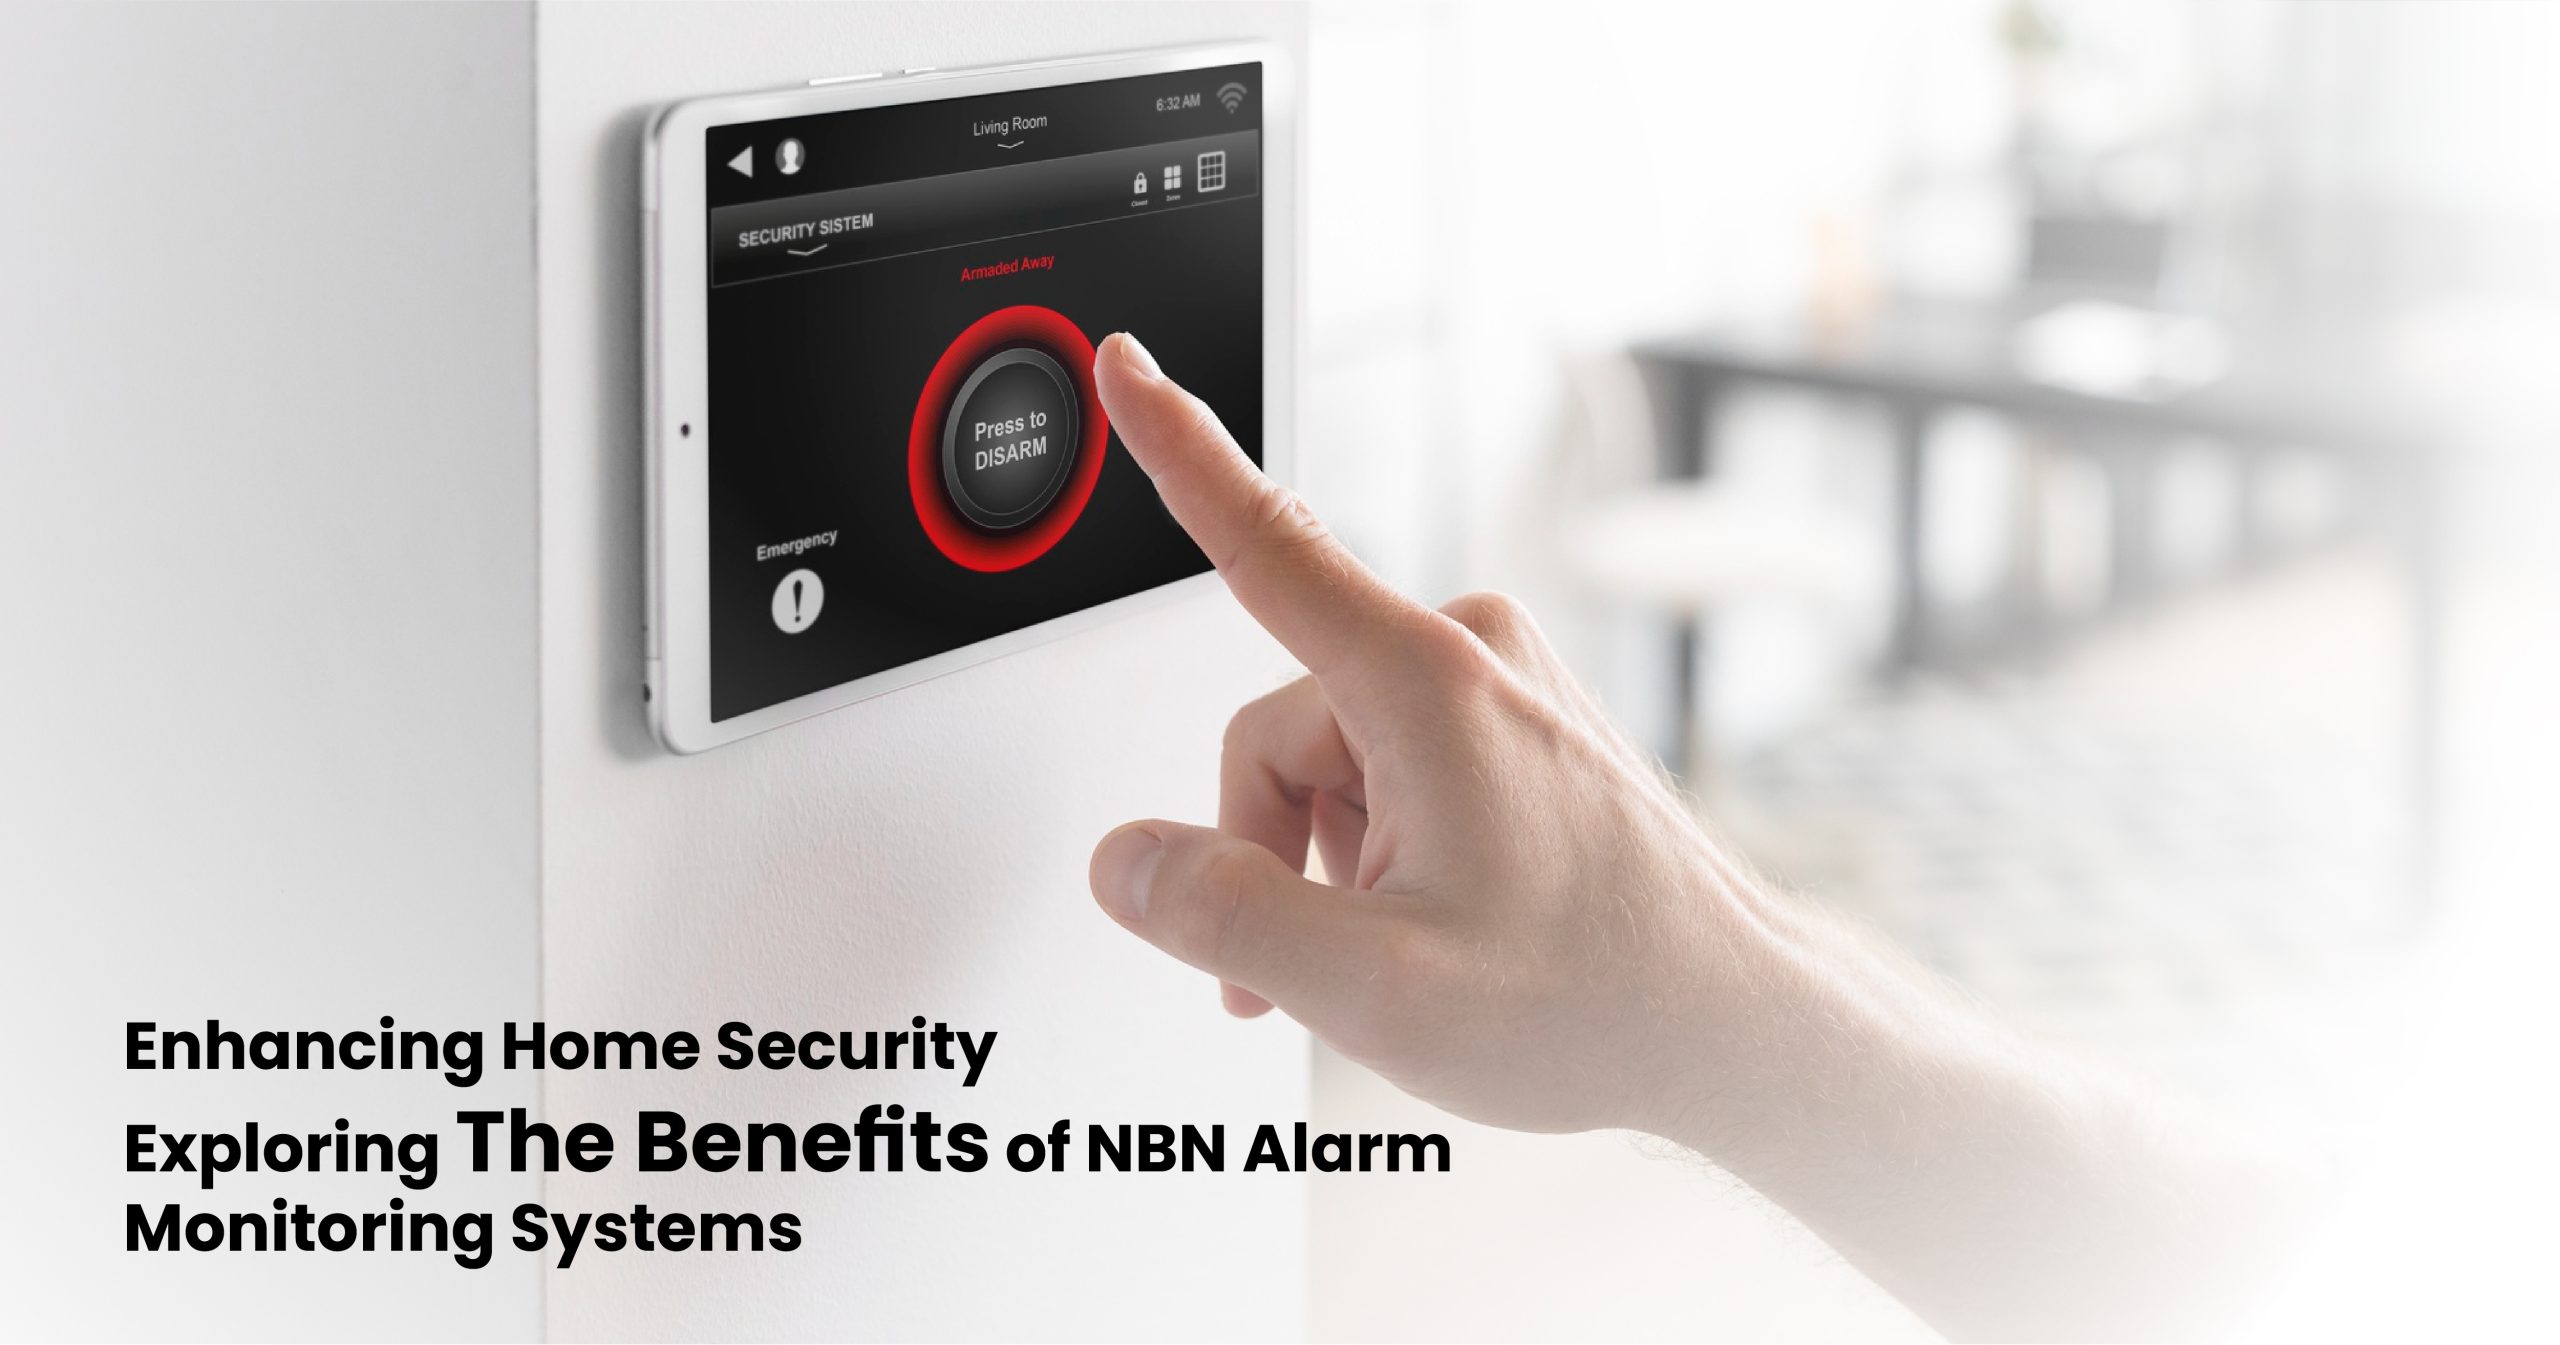 Enhancing Home Security: Exploring the Benefits of NBN Alarm Monitoring Systems